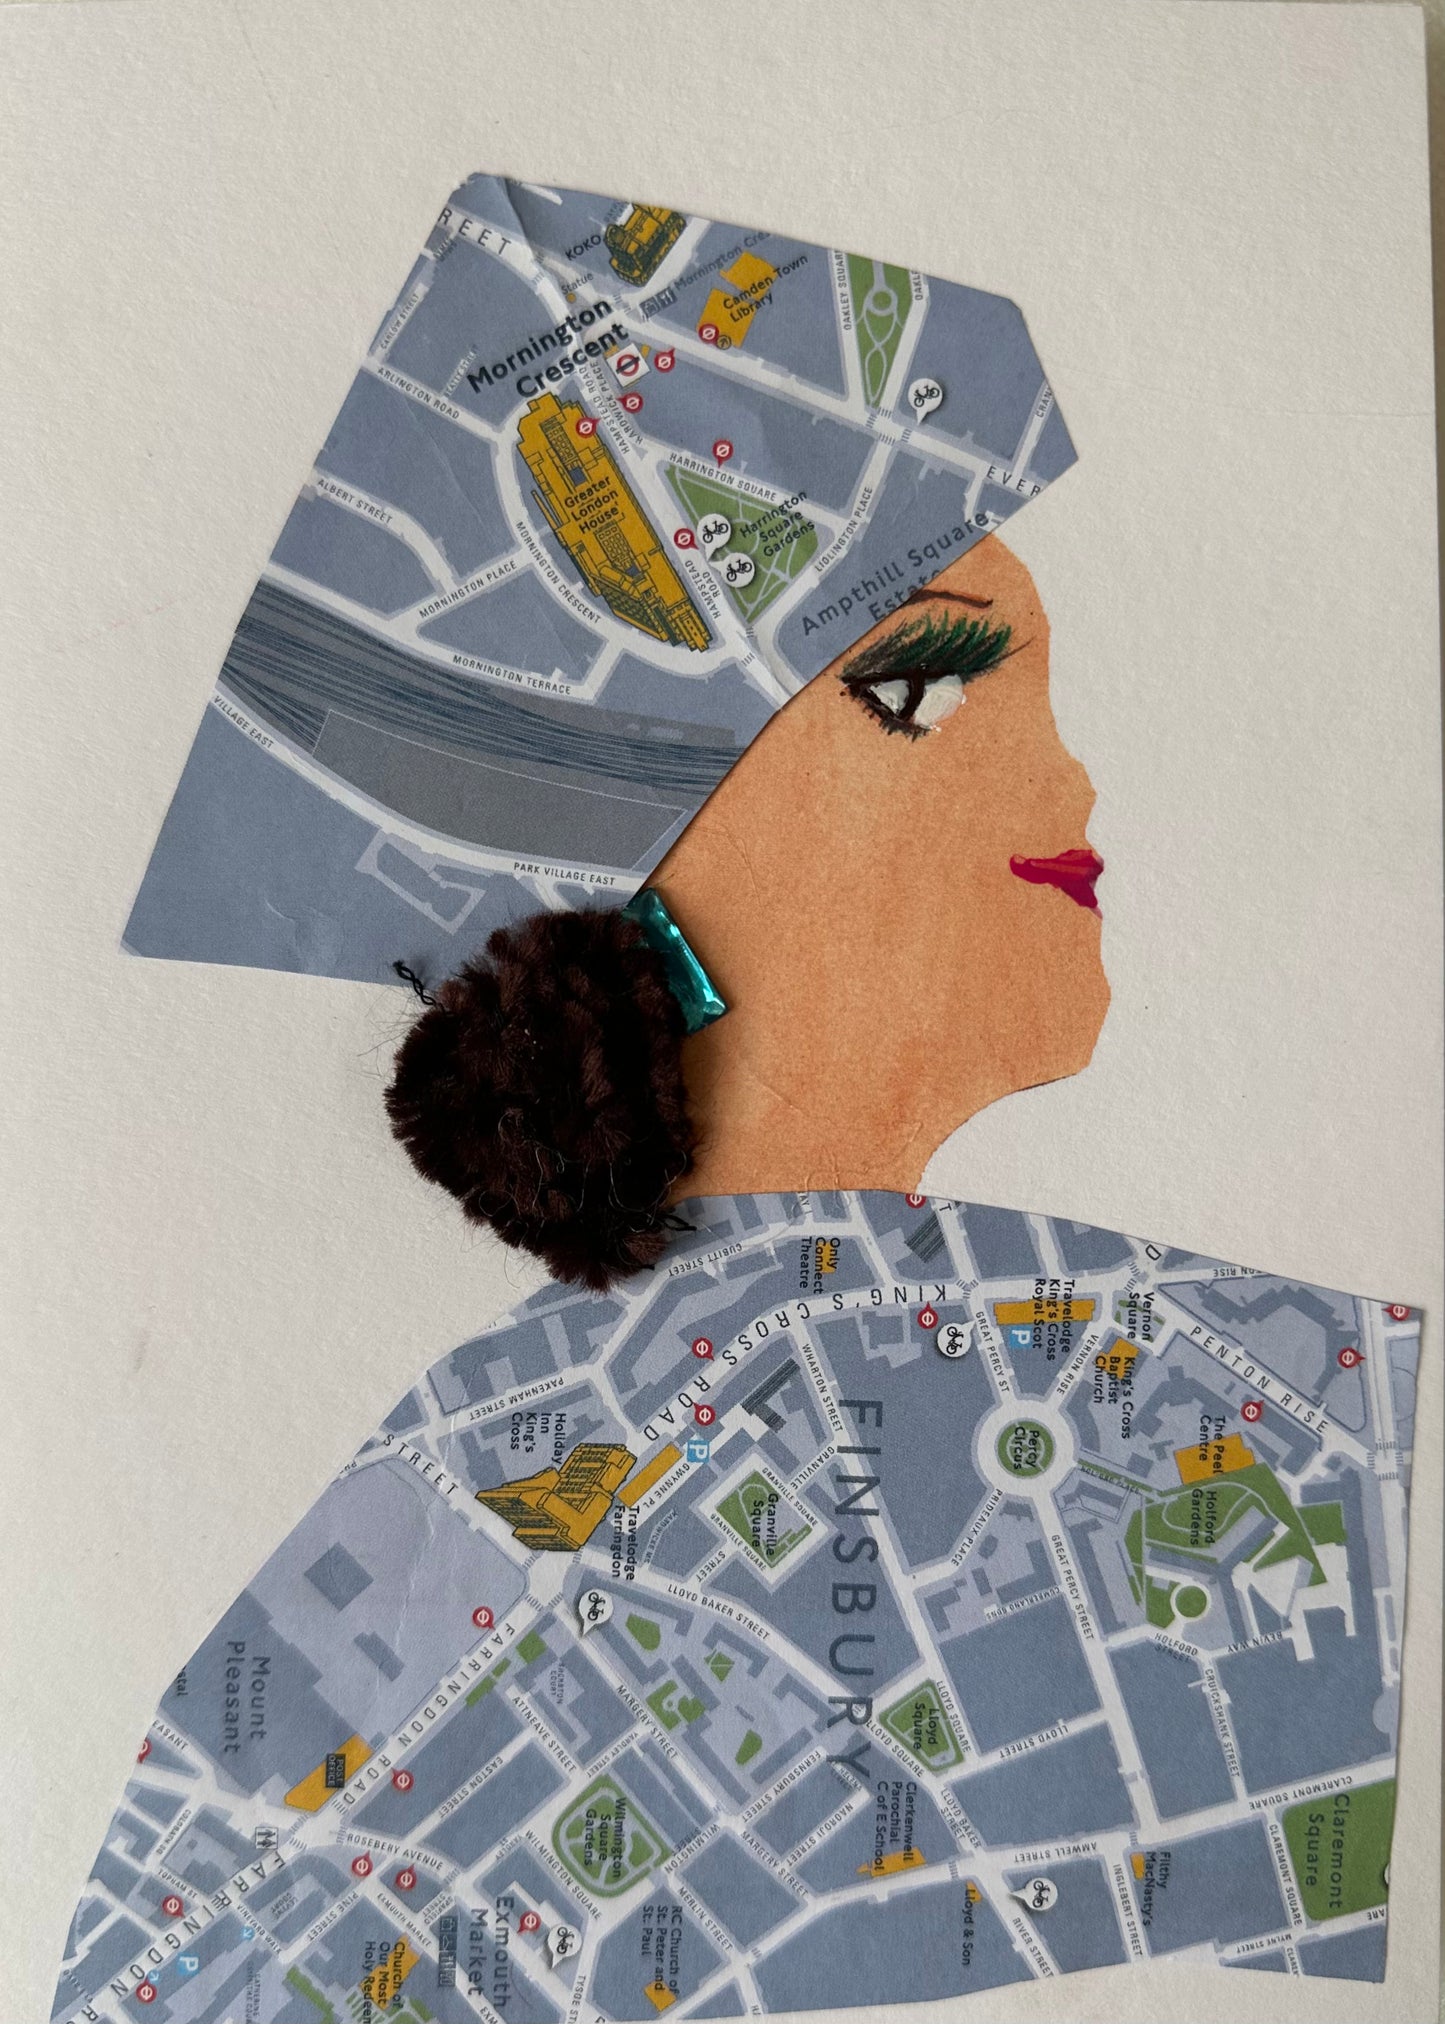 I created this handmade card of a woman wearing a blouse and matching hair piece that are of the map of Finsbury. She has teal earrings that are covered by her black curly hair.